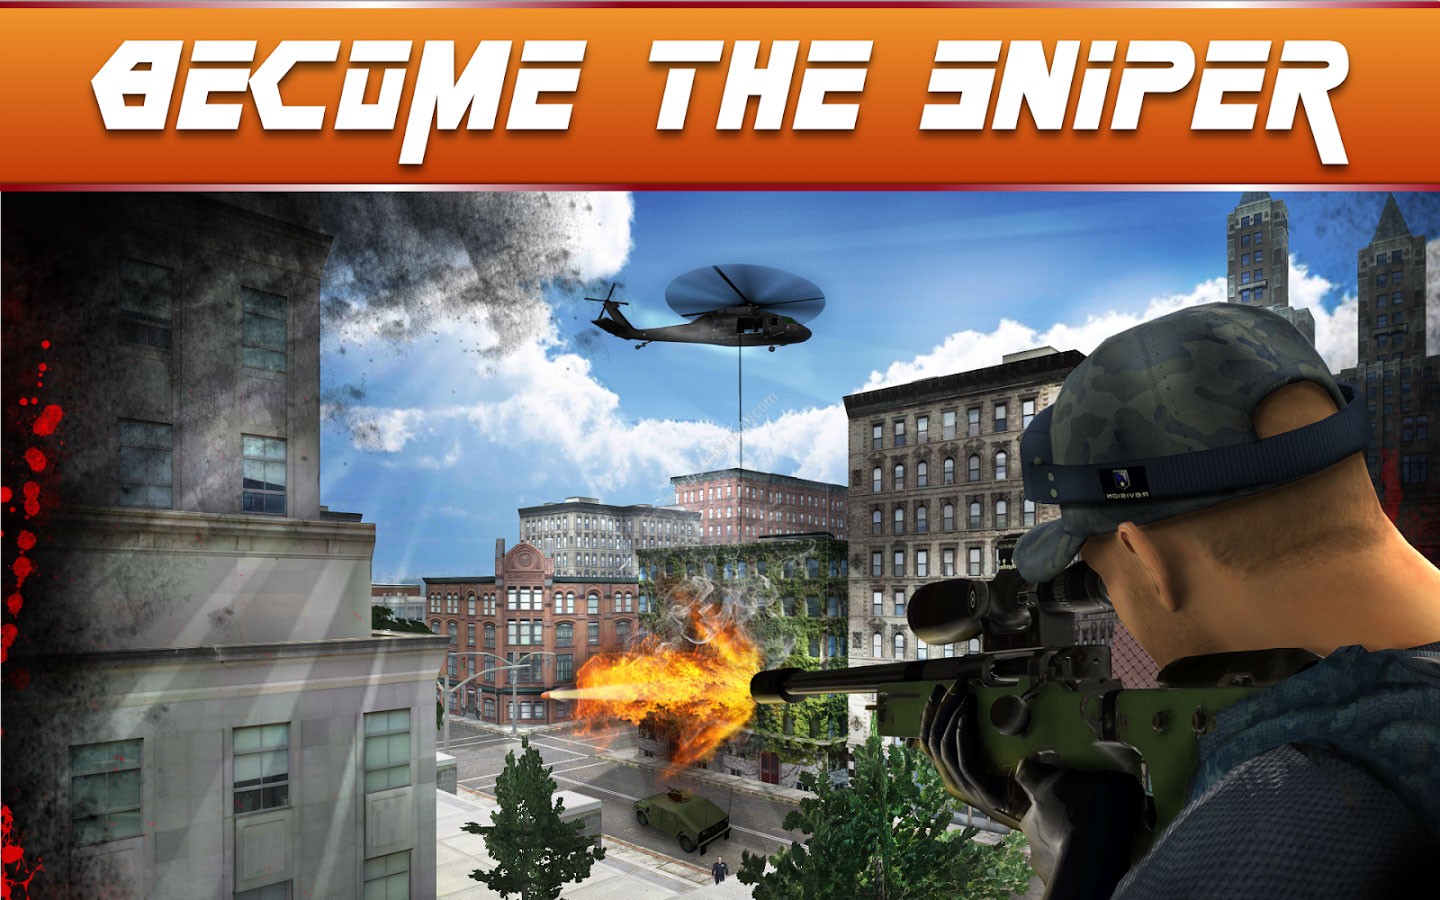 Sniper Ops 3D Shooter - Top Sniper Shooting Game download the new for android